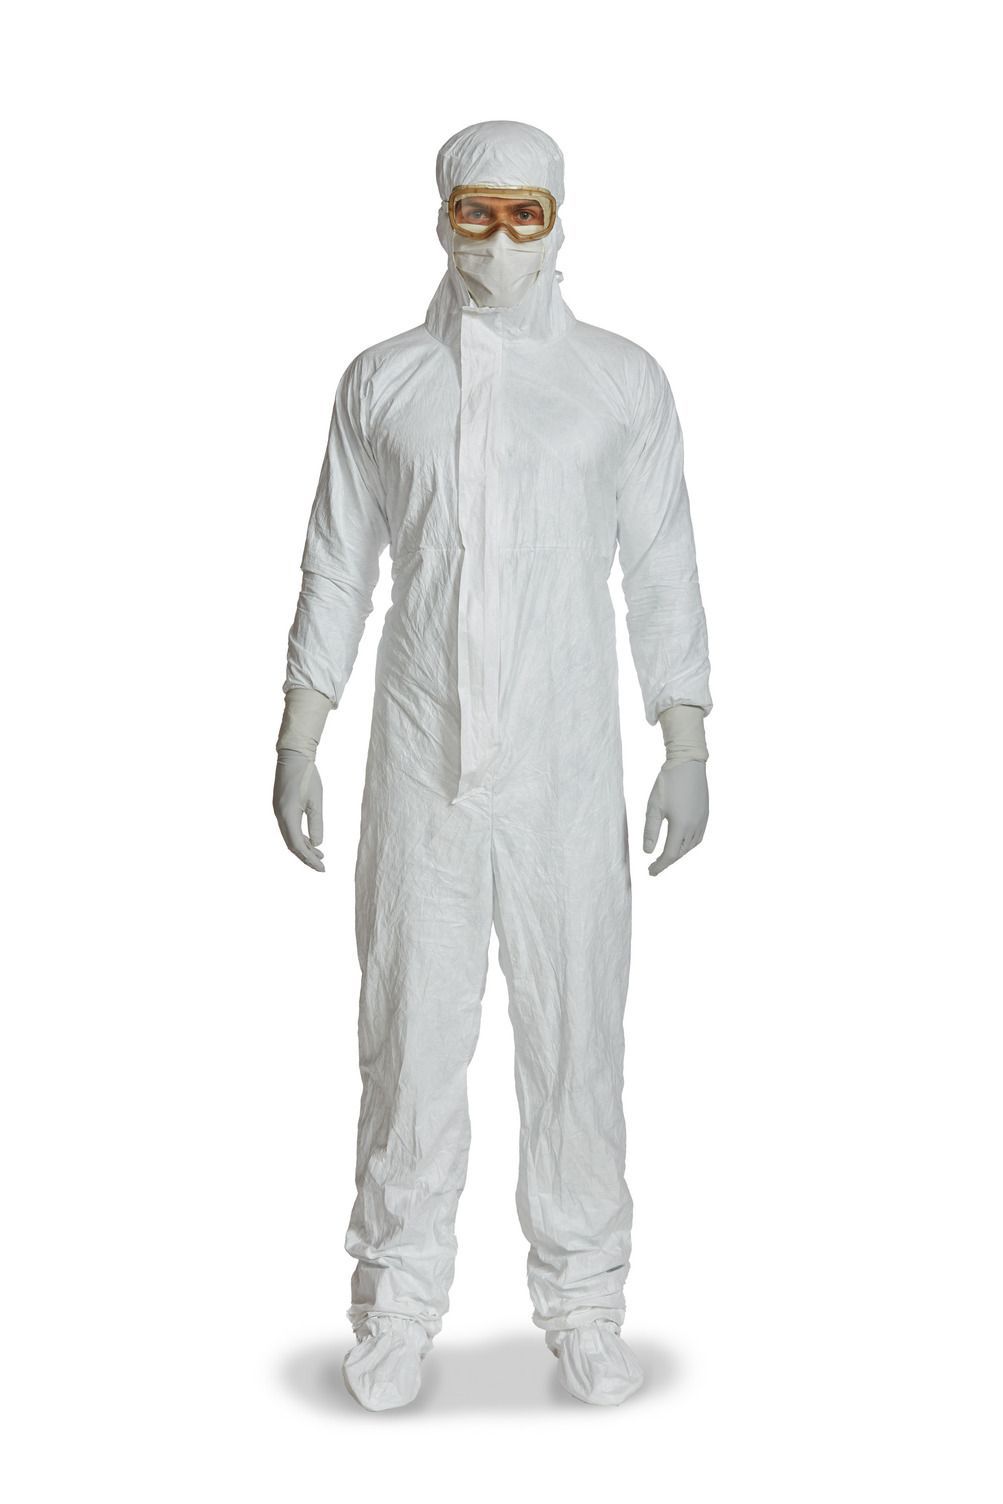 DuPont Tyvek IsoClean hooded coverall